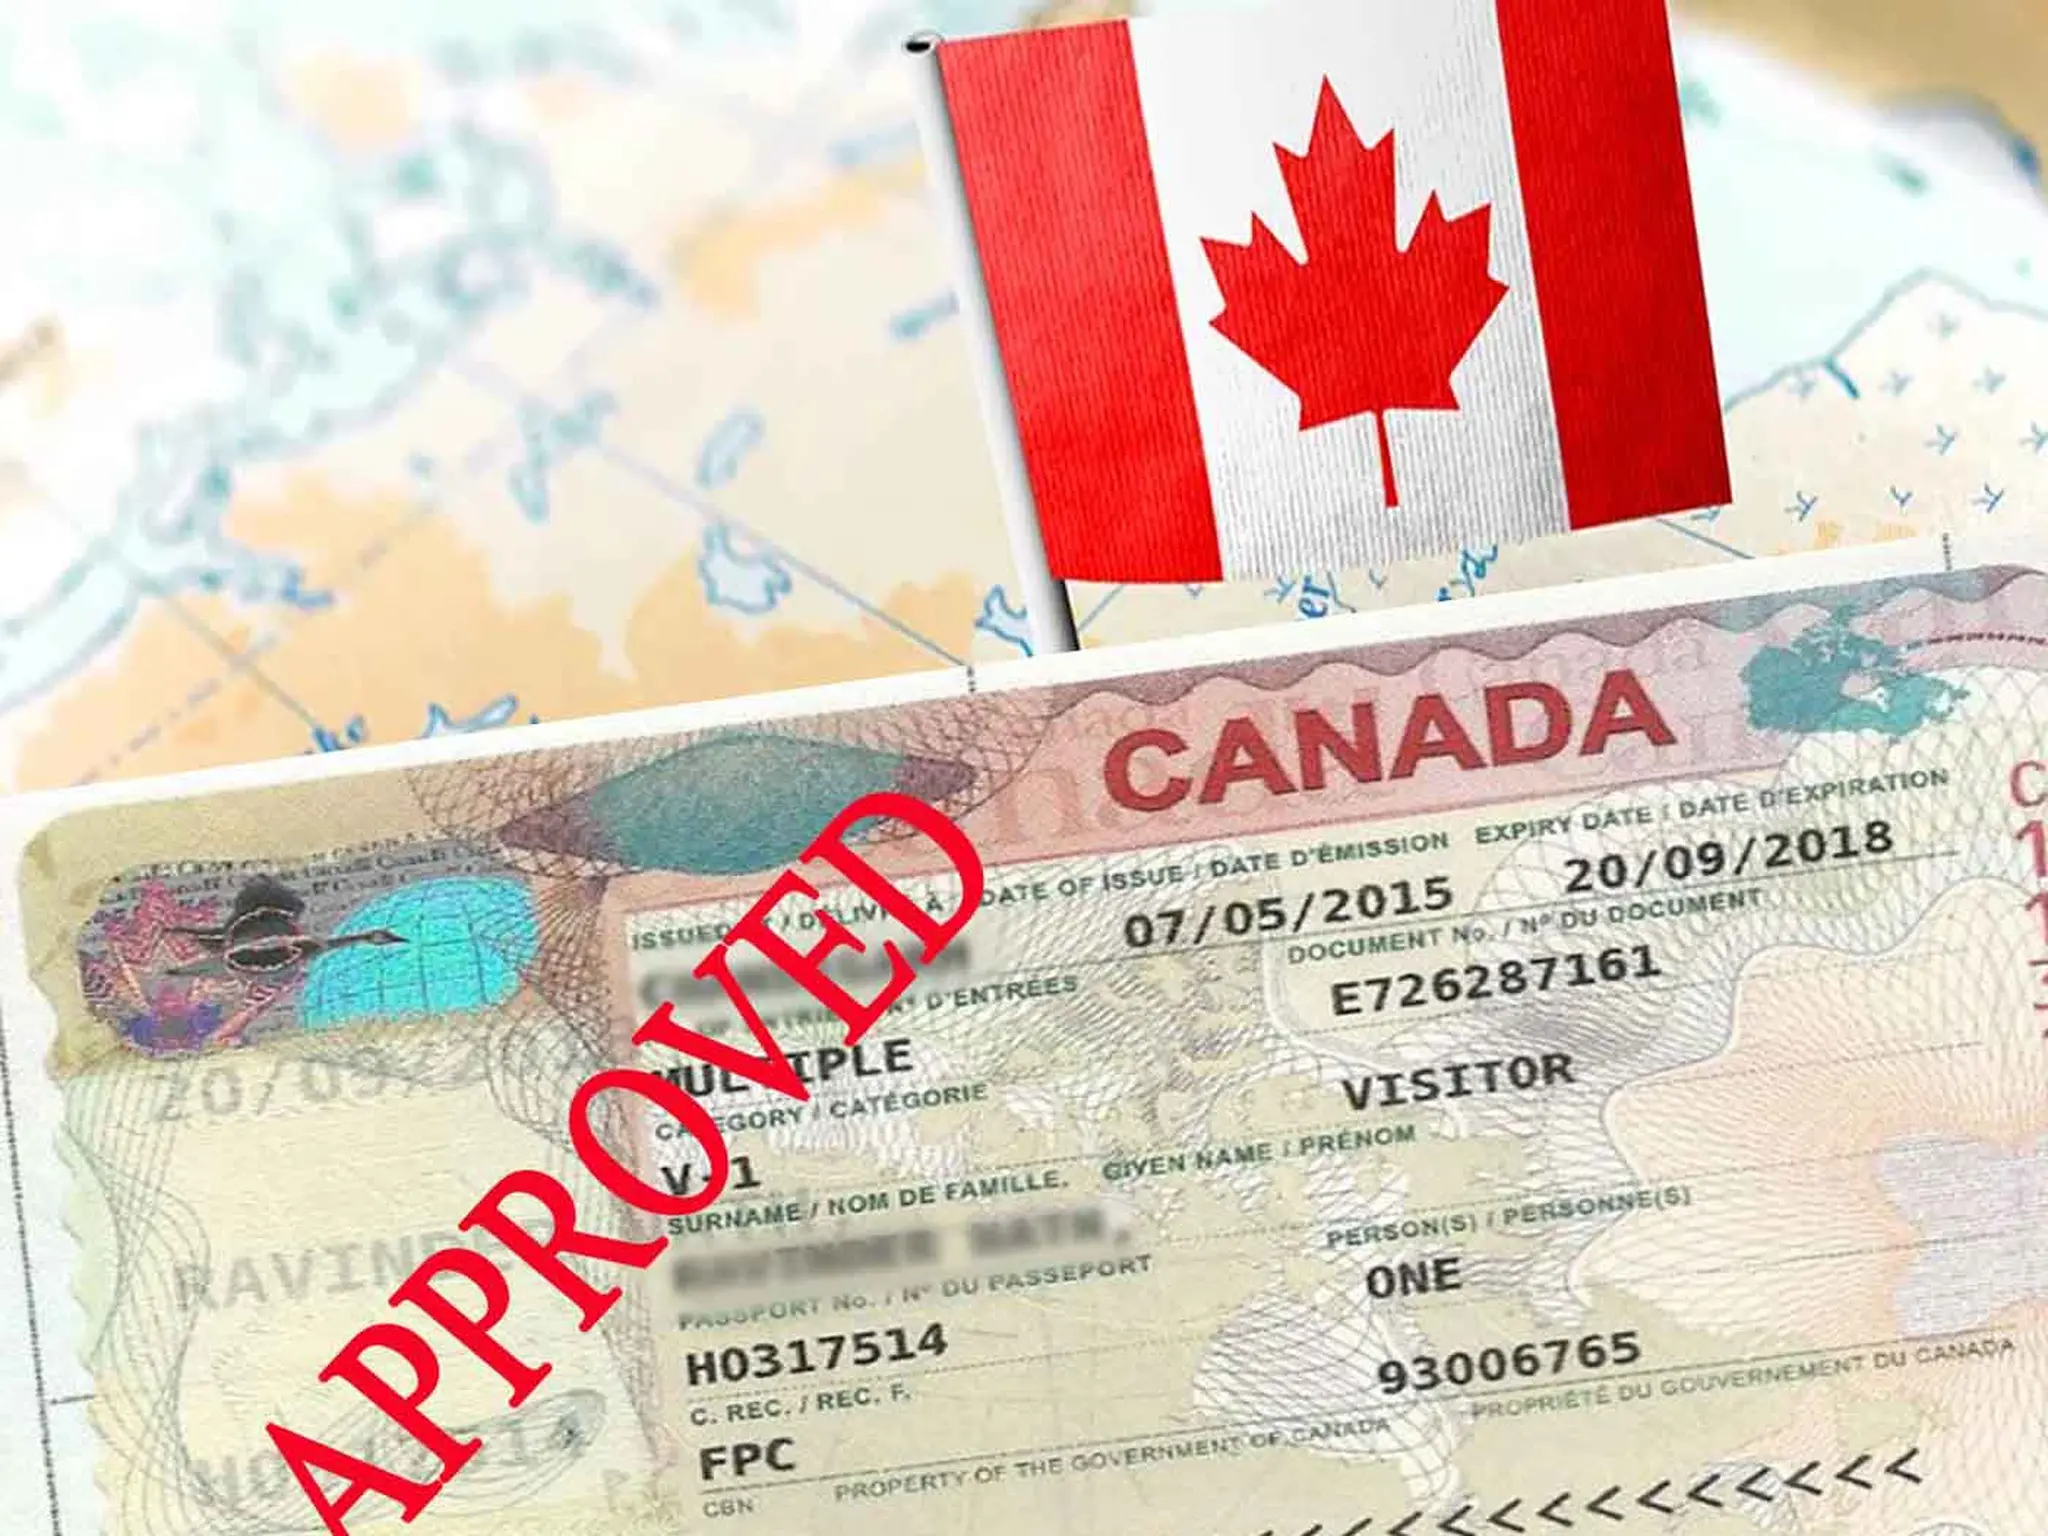 Canada intends to grant a 3-year temporary residence permit visa to this country